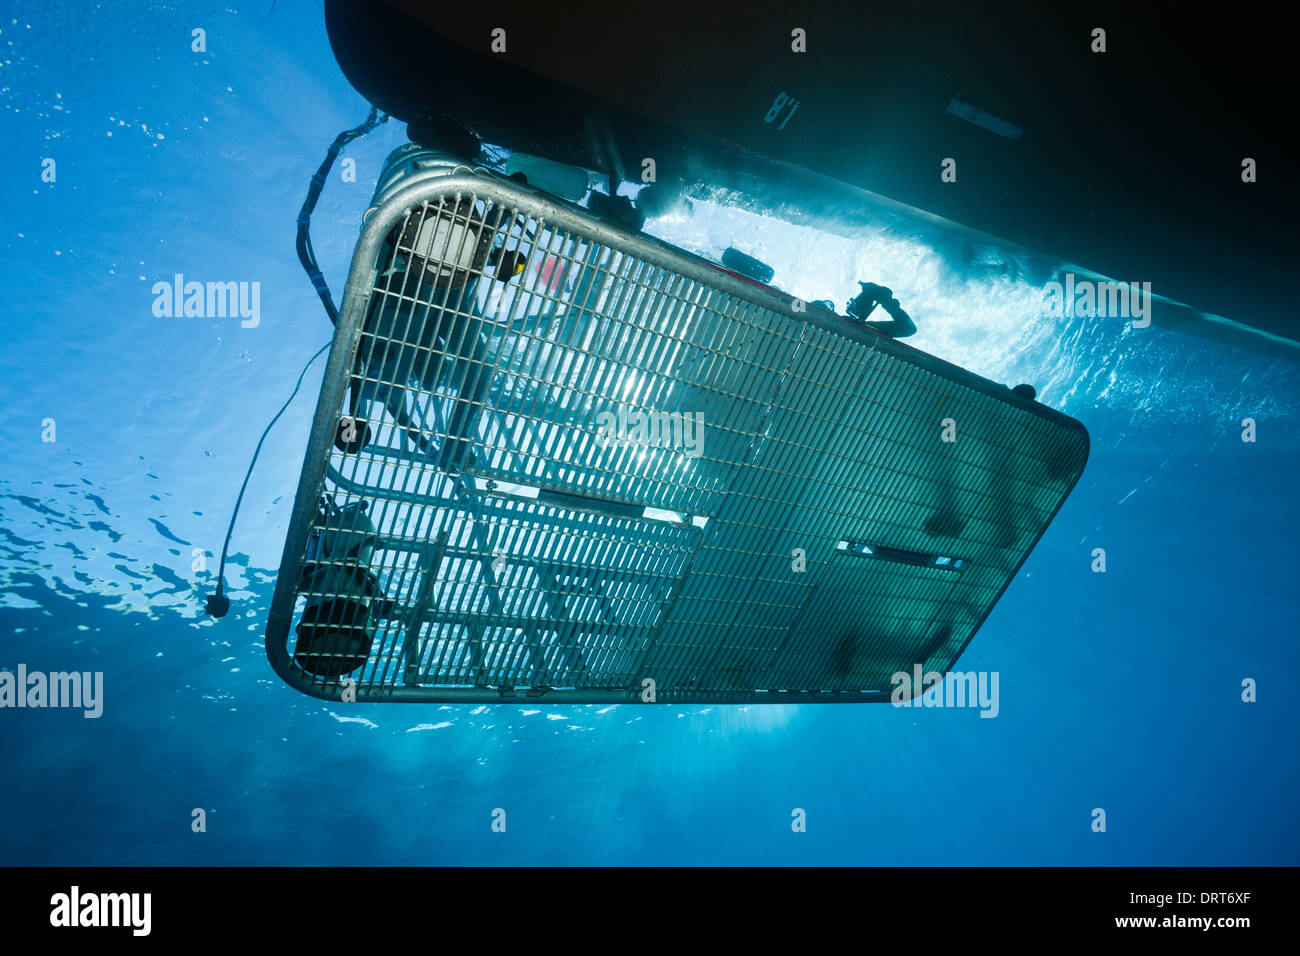 Great White Shark Cage Diving, Guadalupe Island, Mexico Stock Photo